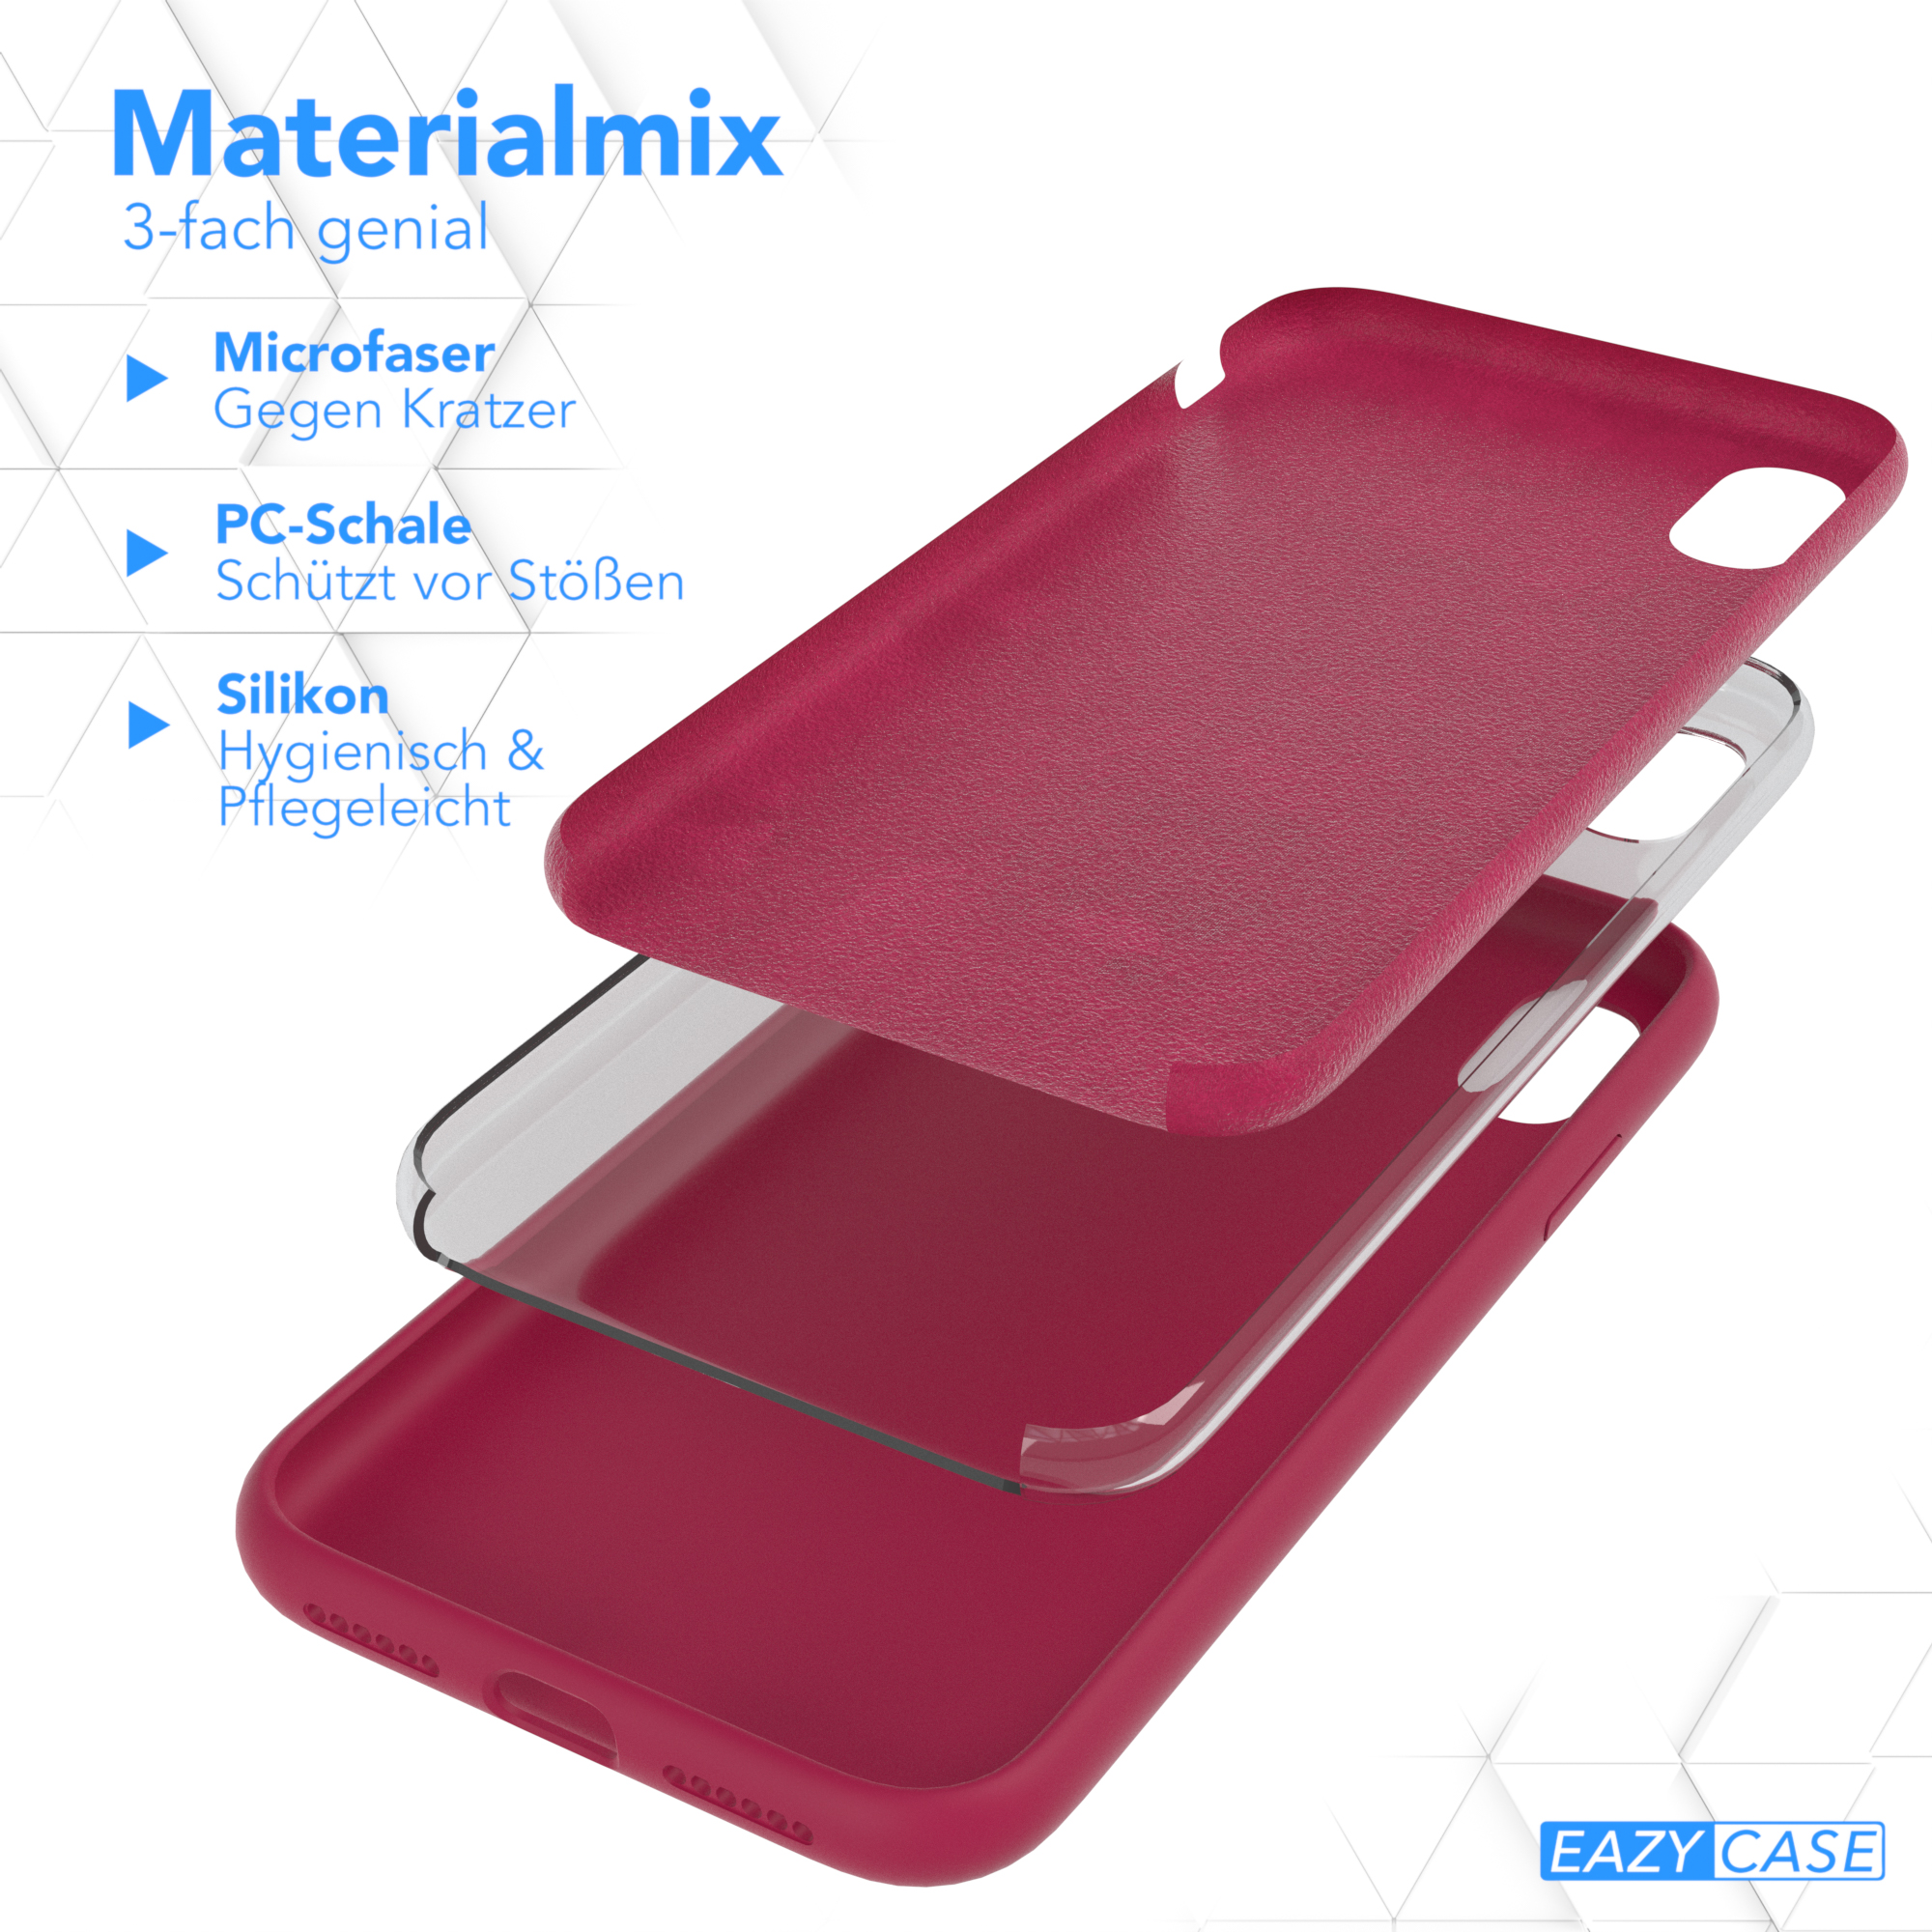 EAZY CASE Premium iPhone Backcover, Beere Rot / Handycase, XR, Apple, Silikon